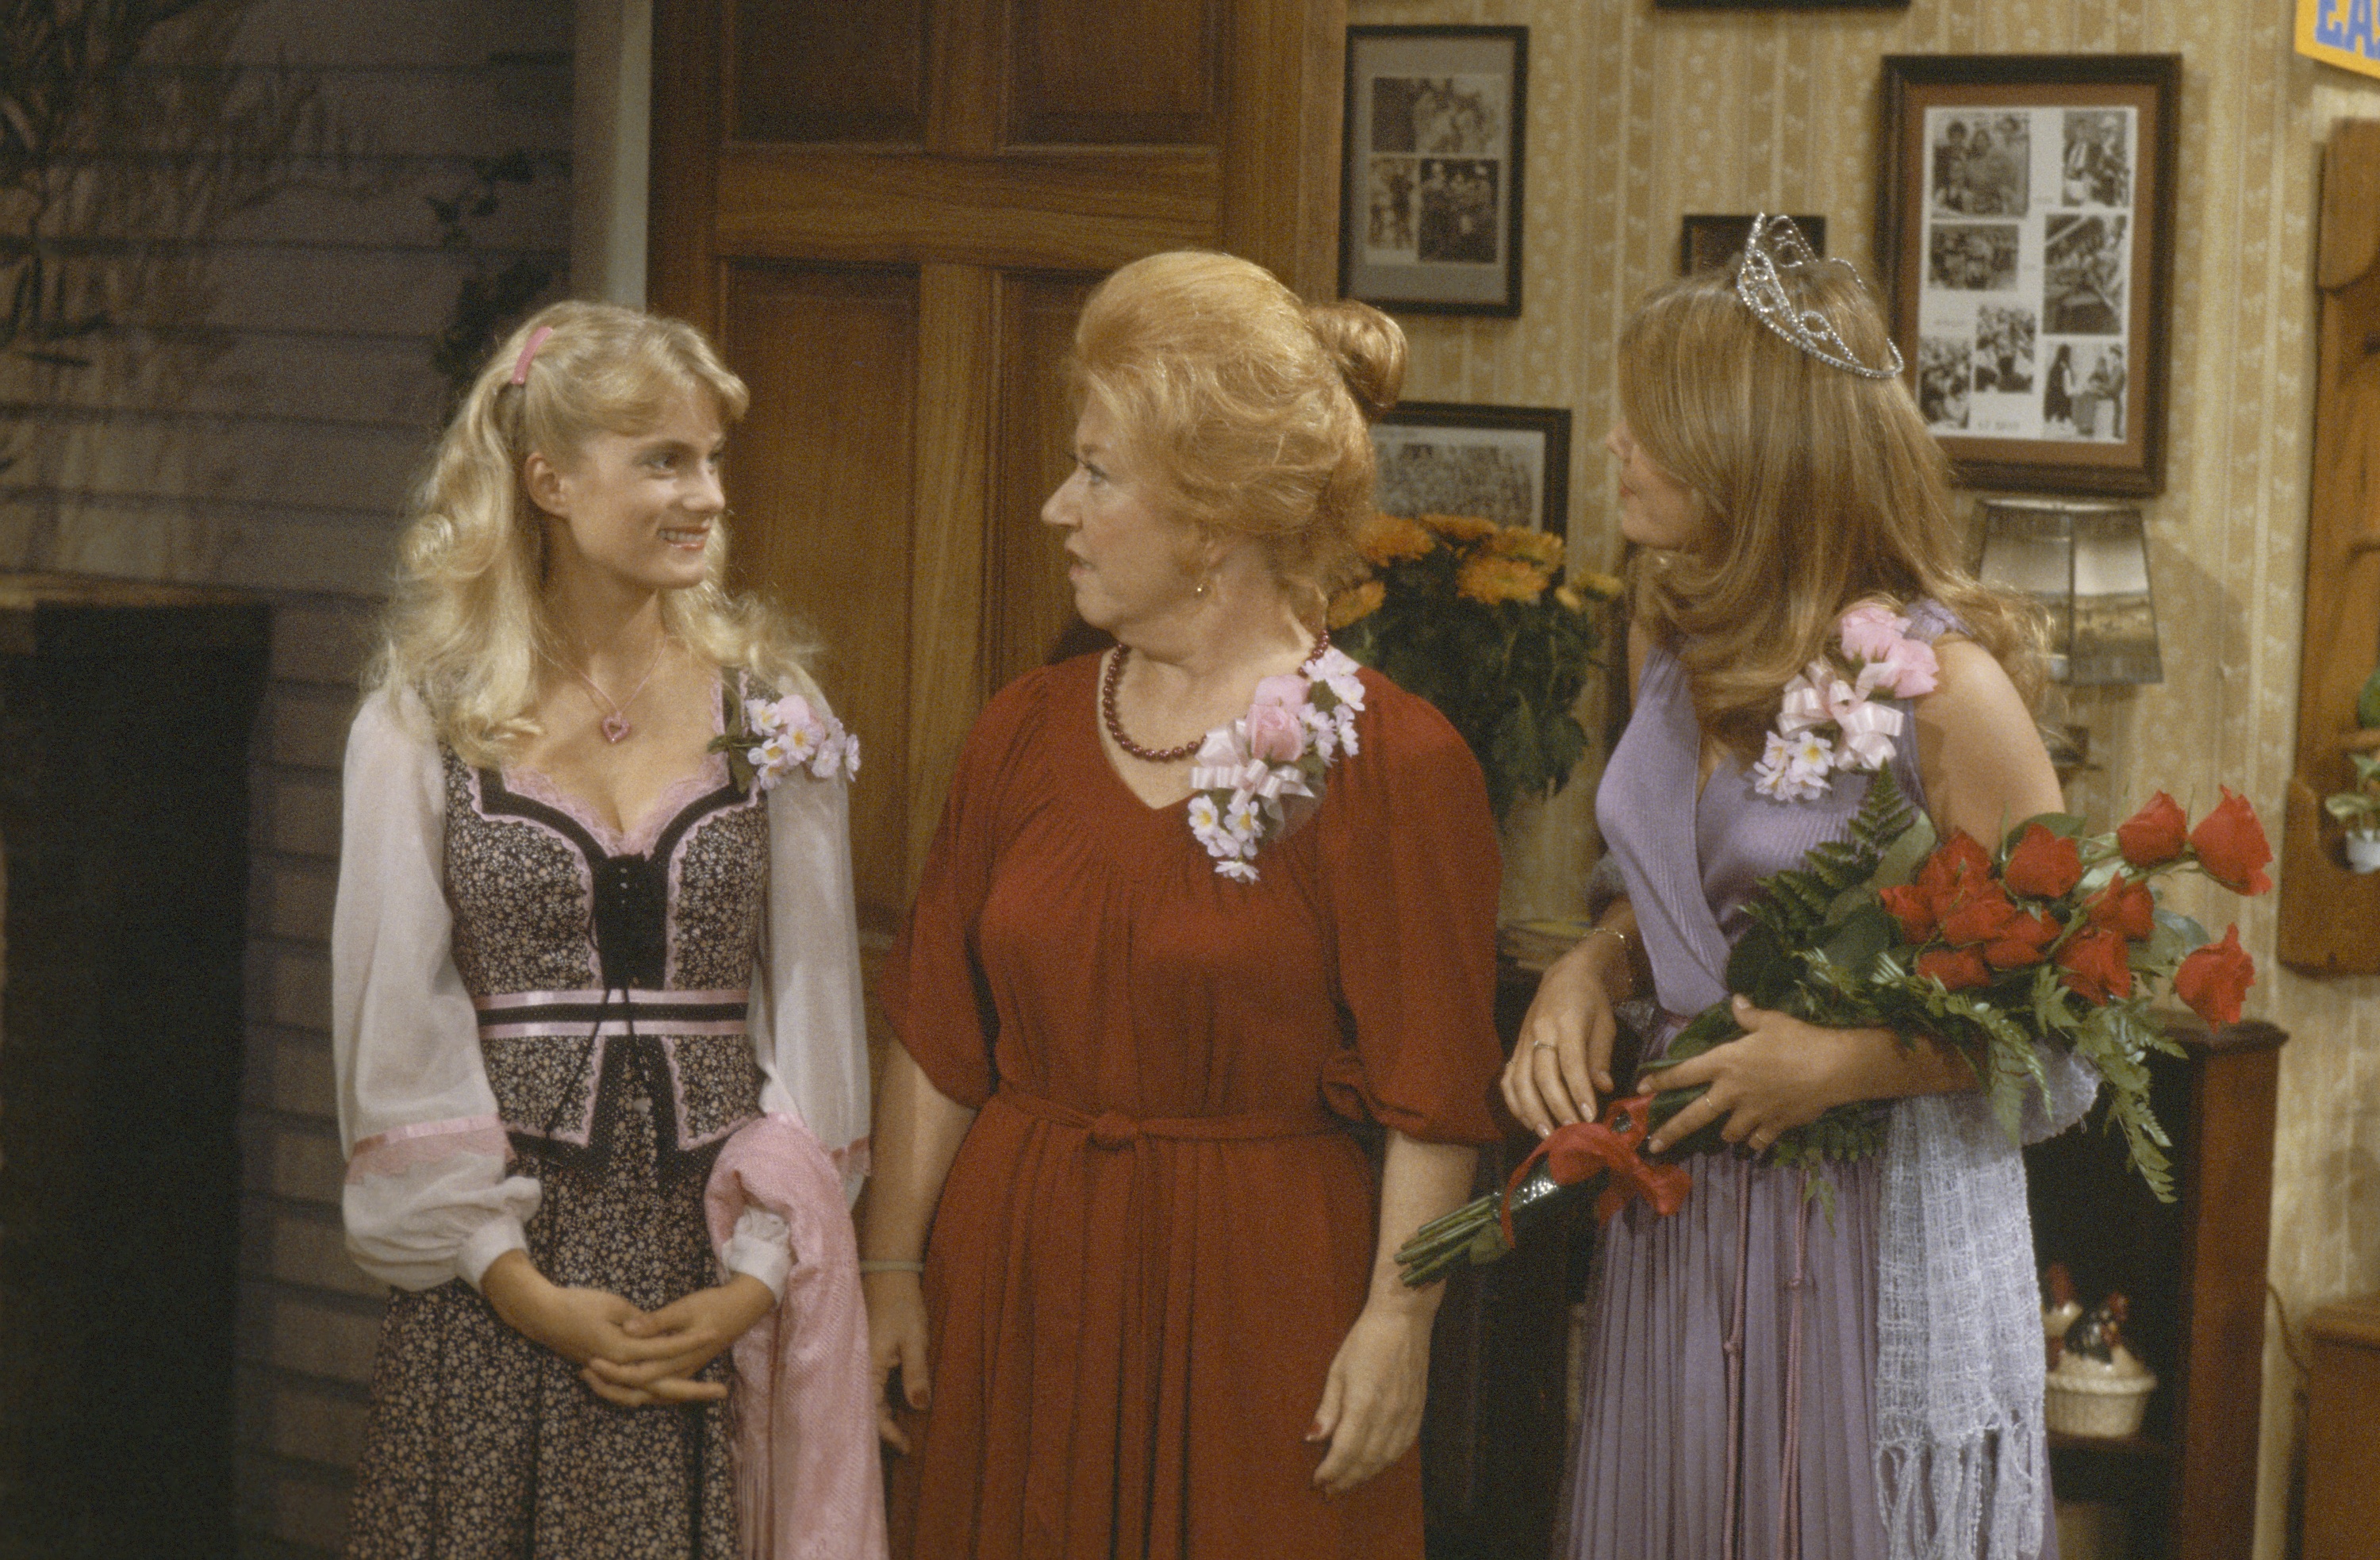 Anne Haddock, Charlotte Rae and Lisa Whelchel sur le plateau de "The Facts of Life", 1979 | Source : Getty Images